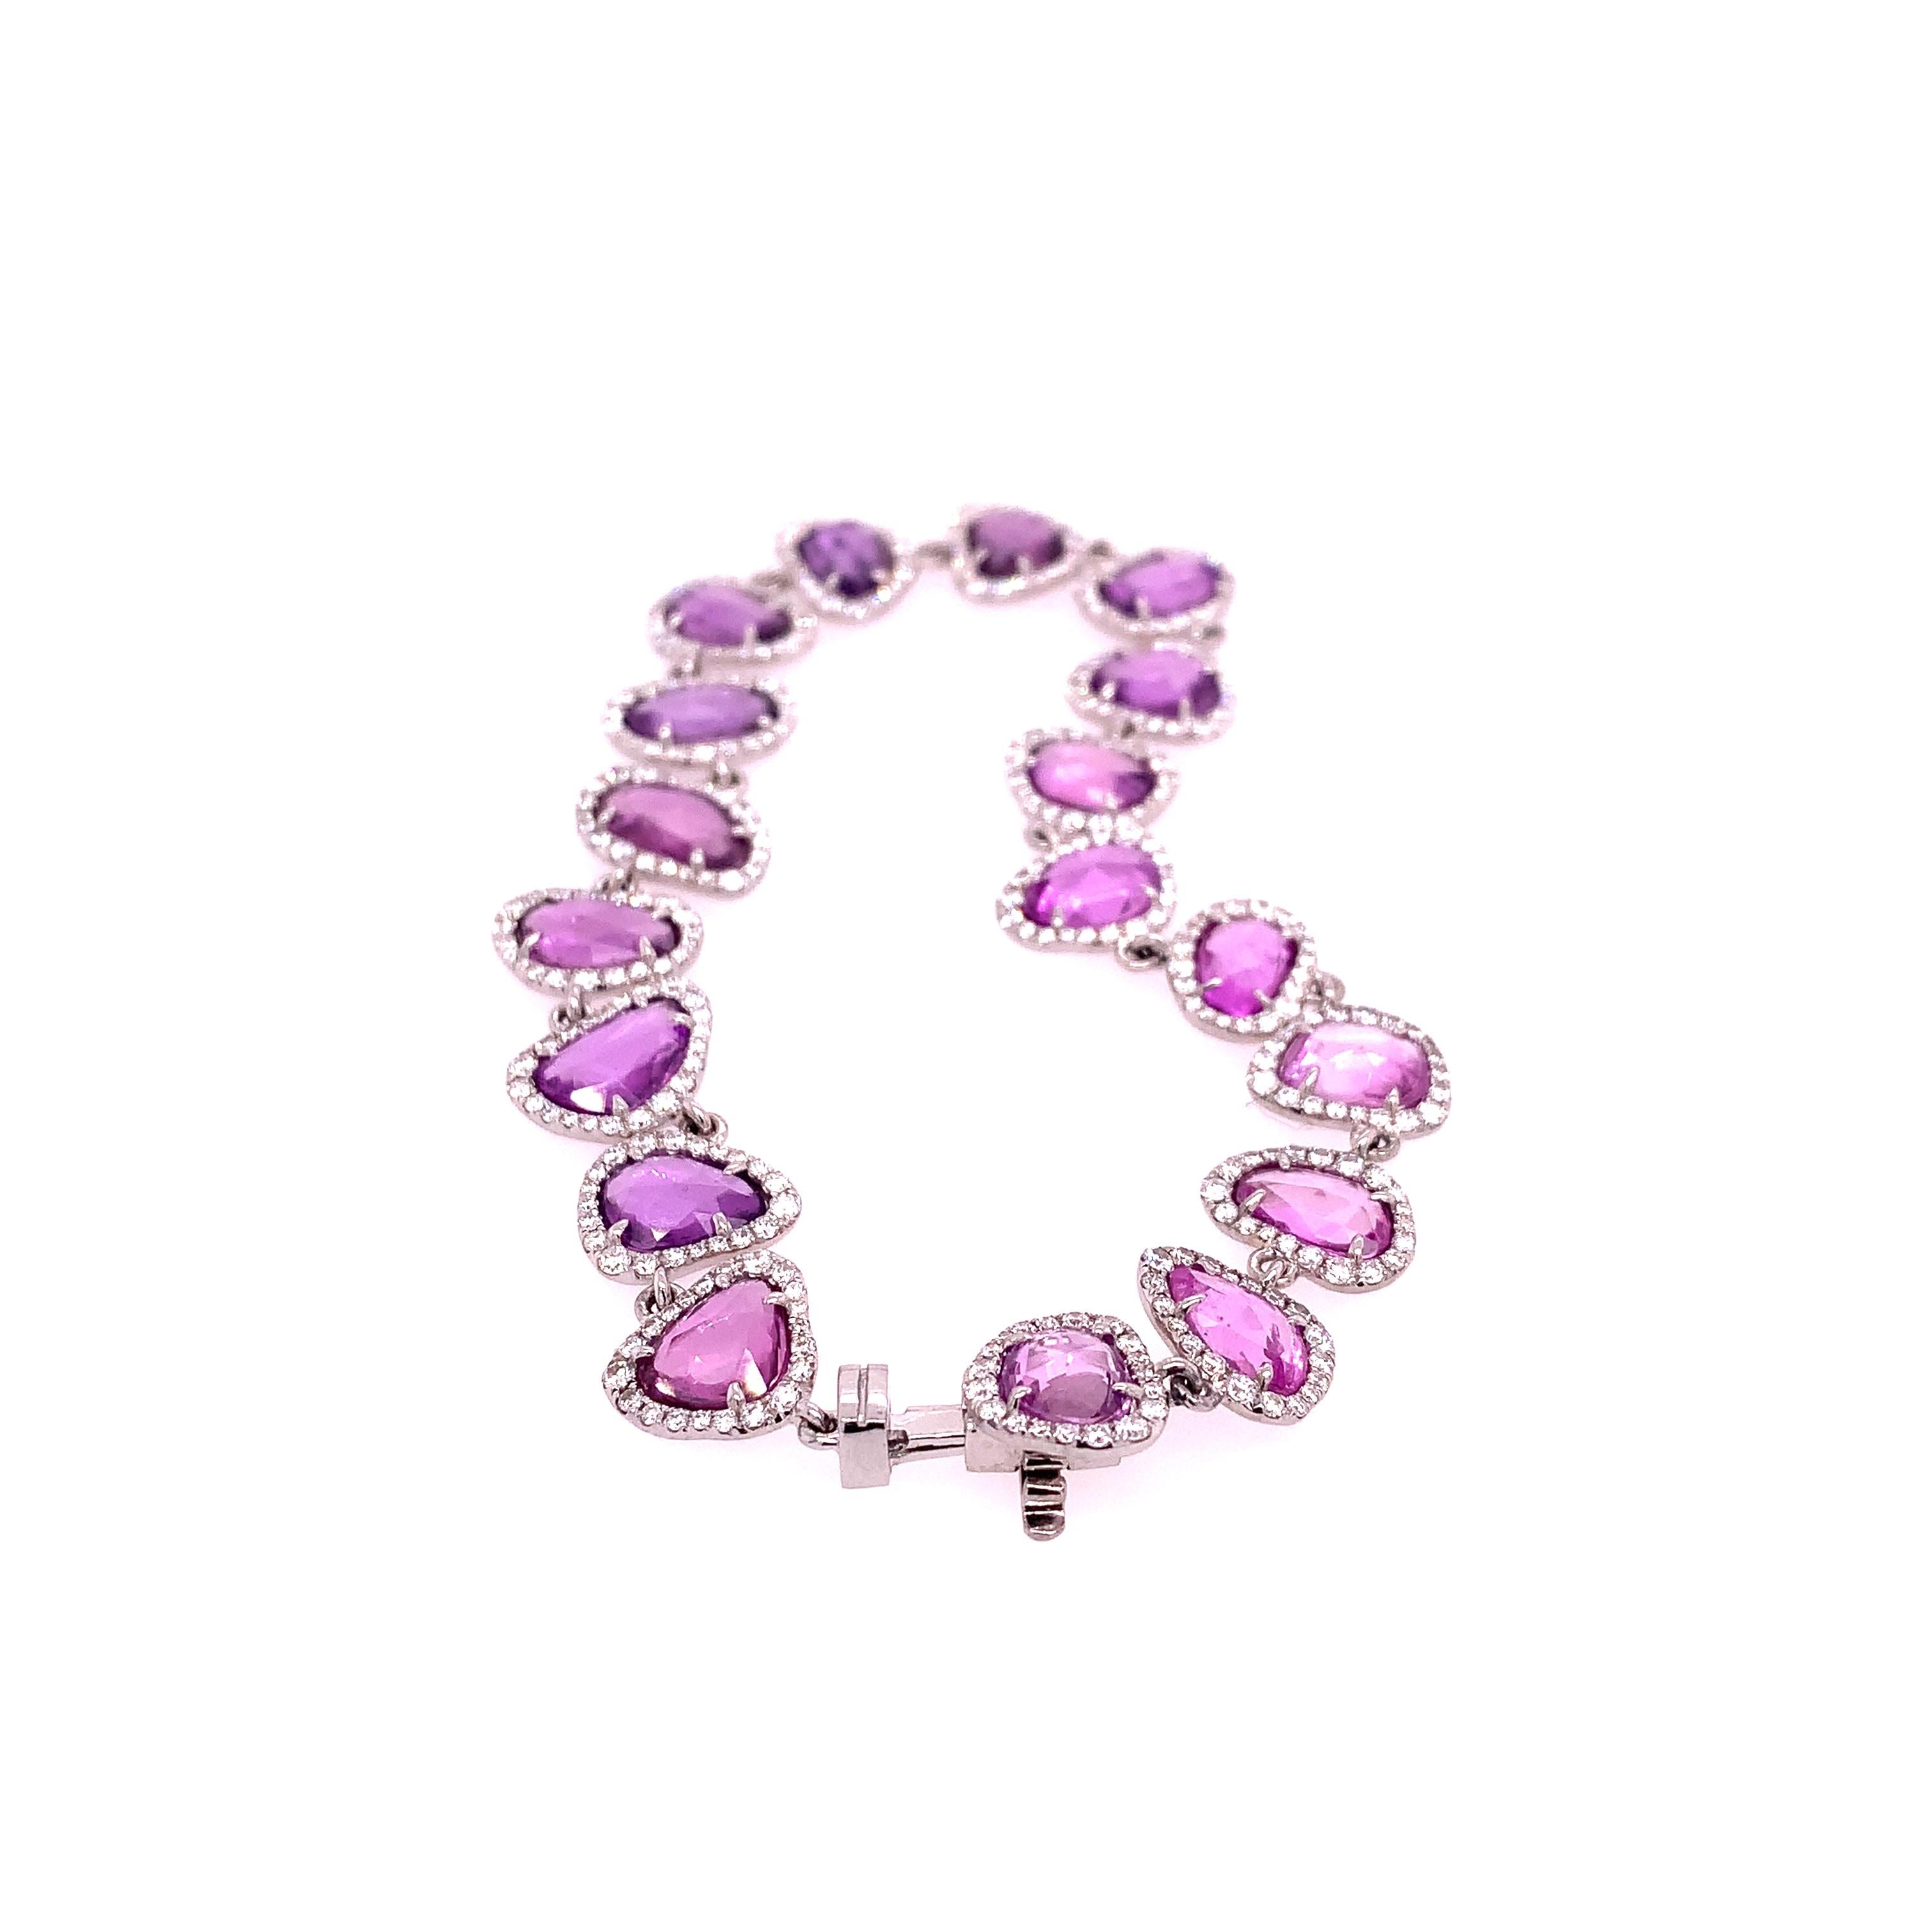 18K White Gold
Pink Sapphire: 13.92ct total weight
Diamond: 1.91ct total weight
All diamonds are G-H/SI stones.
